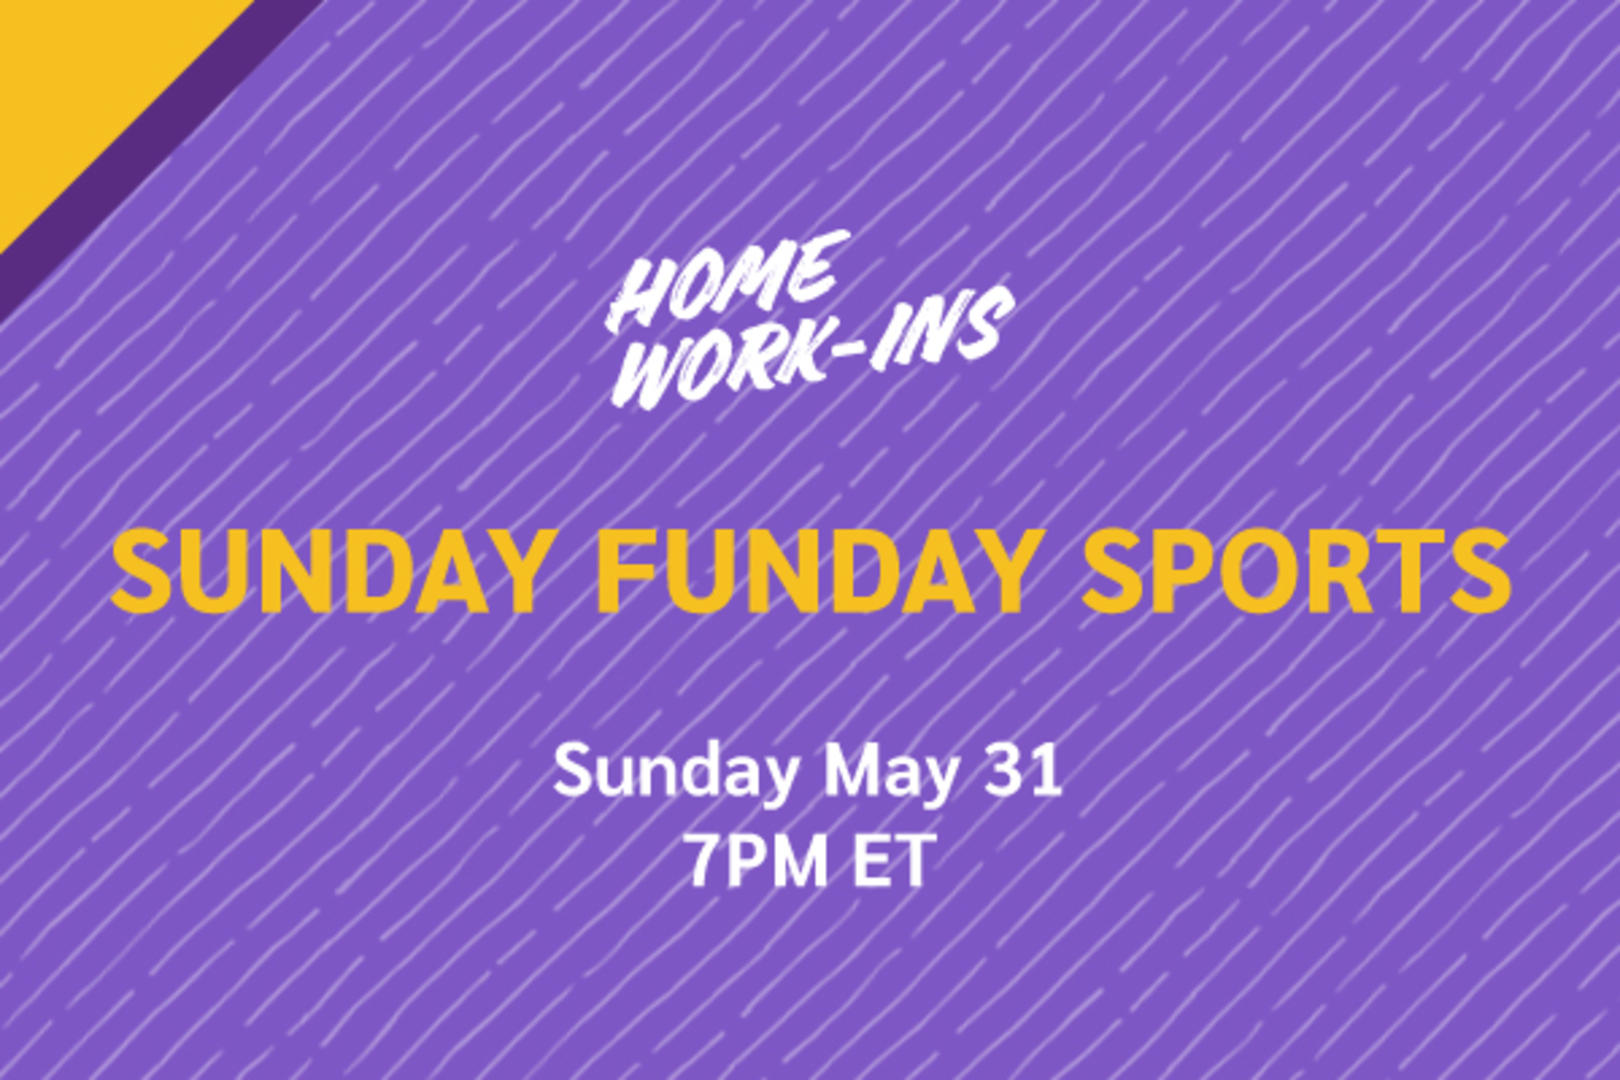 Image showing the copy Sunday Funday Sports on 5/31 at 7PM ET